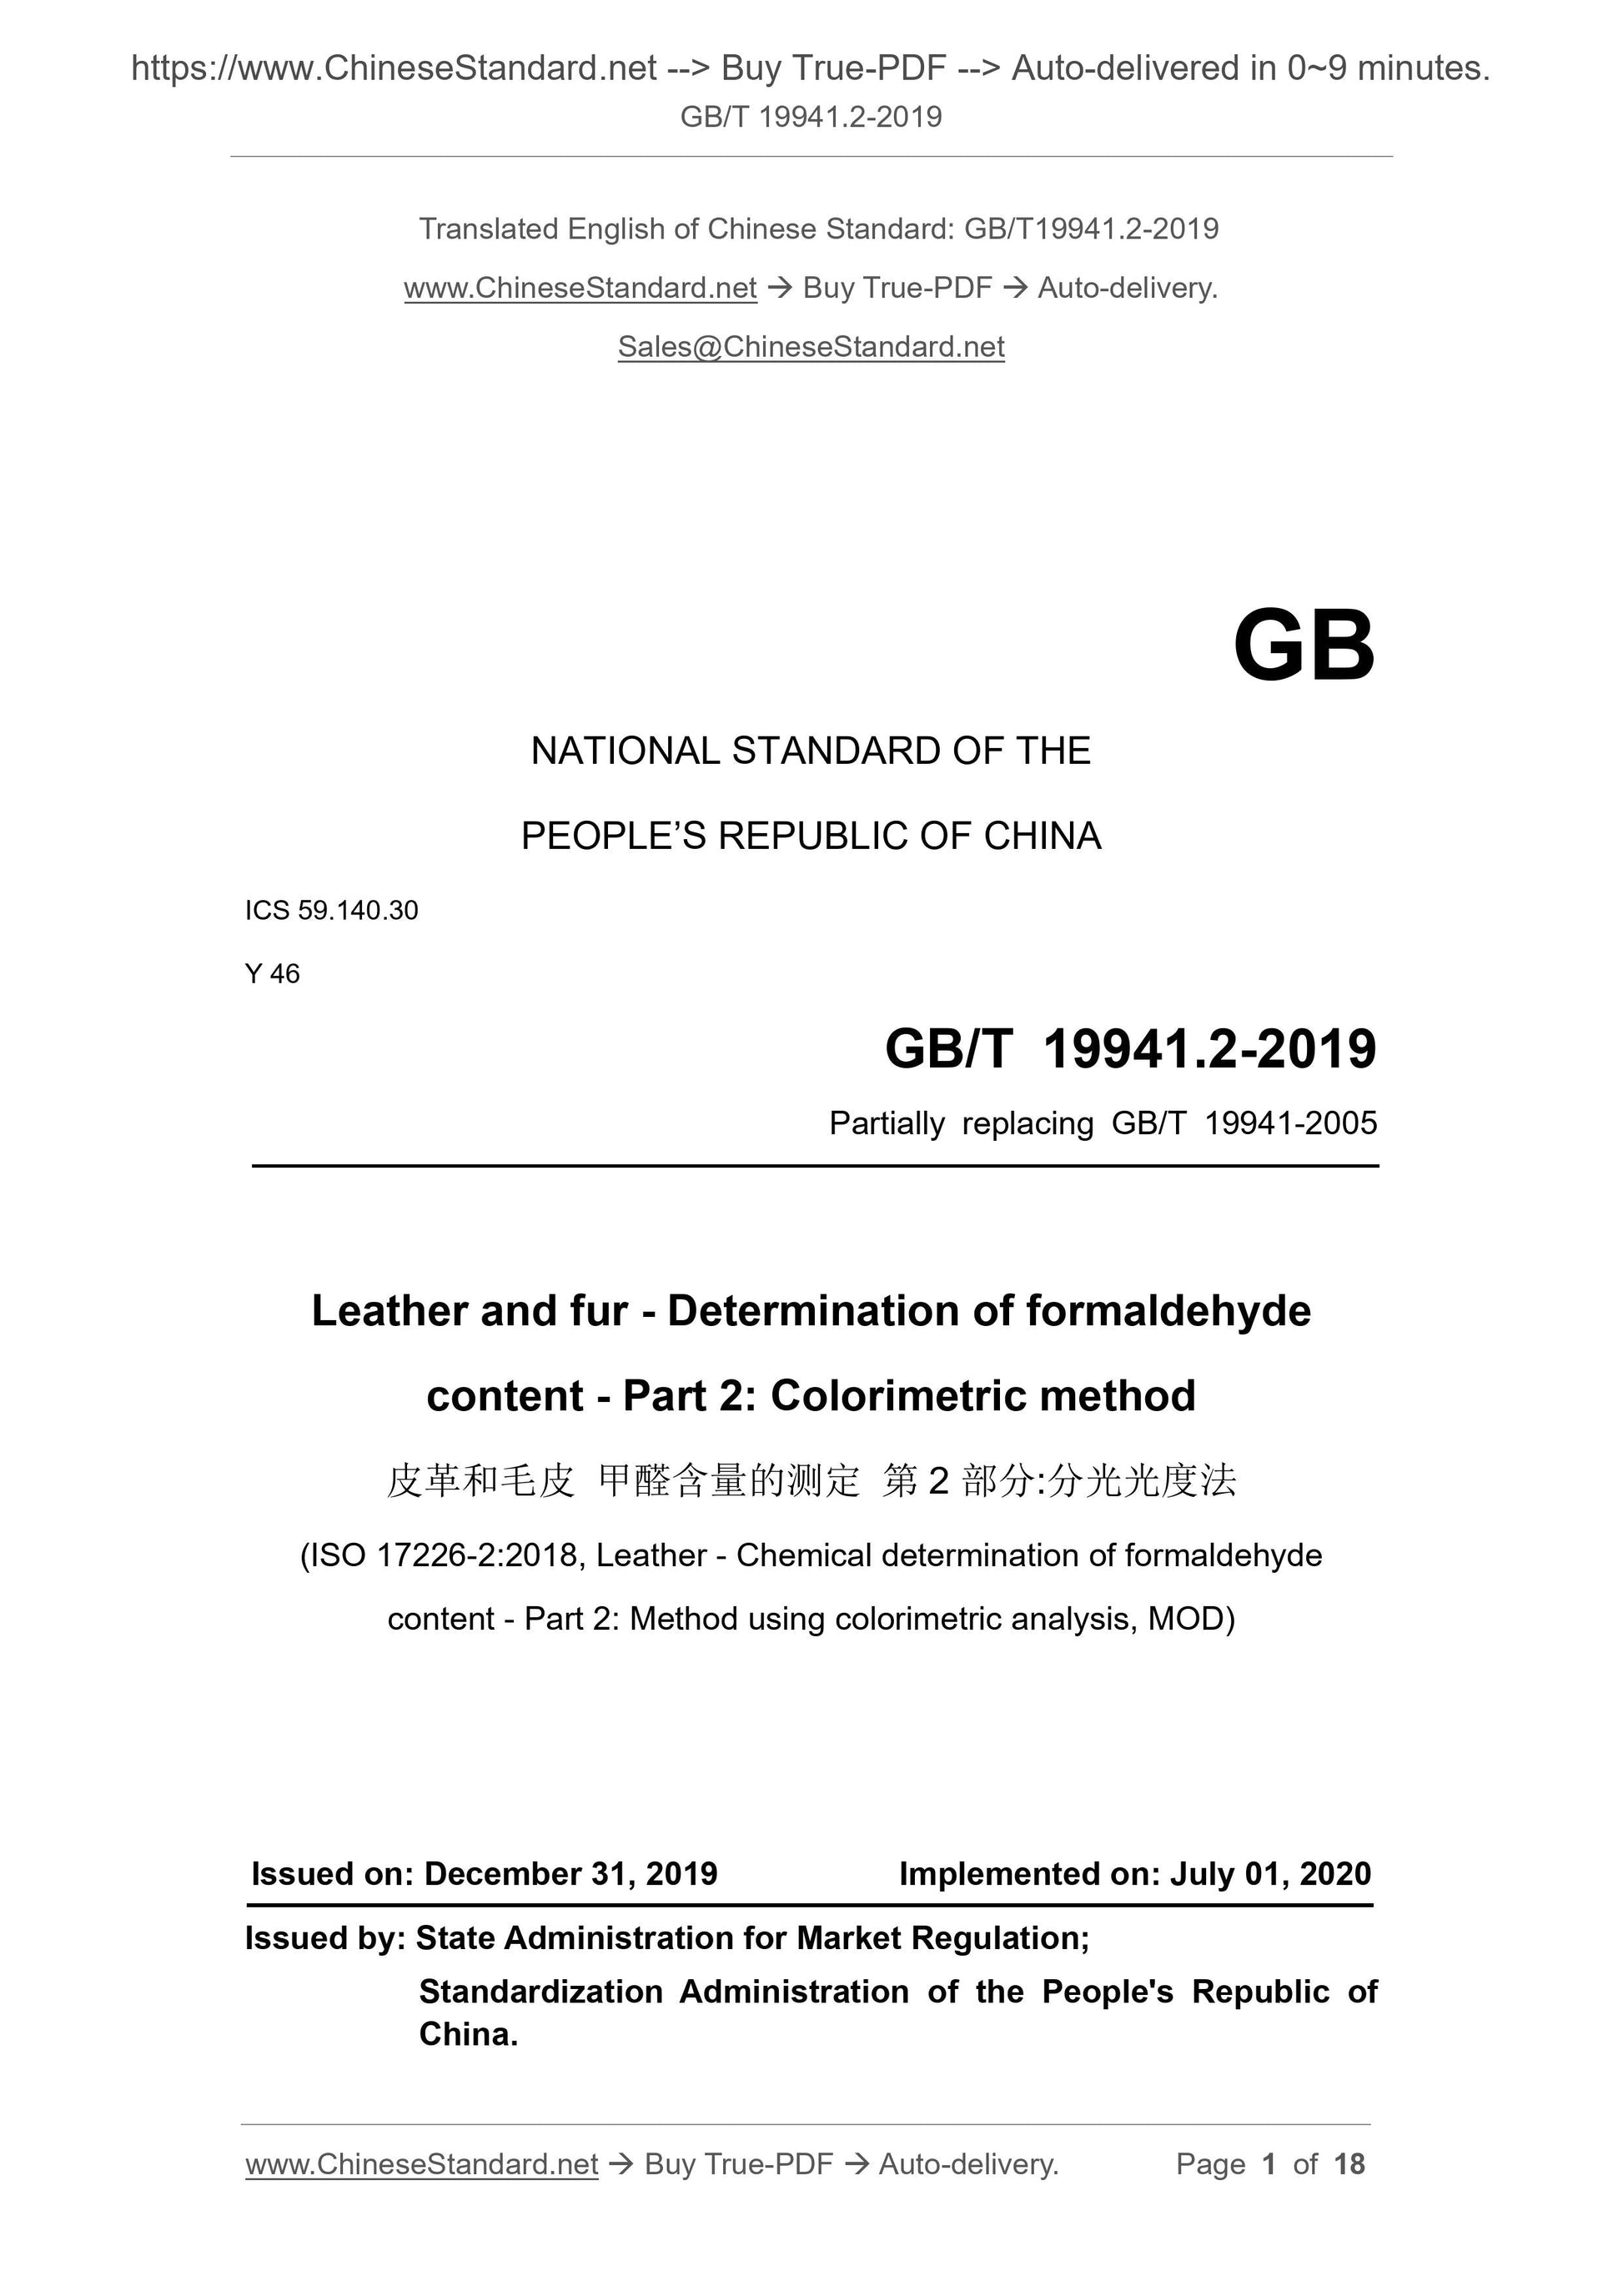 GB/T 19941.2-2019 Page 1